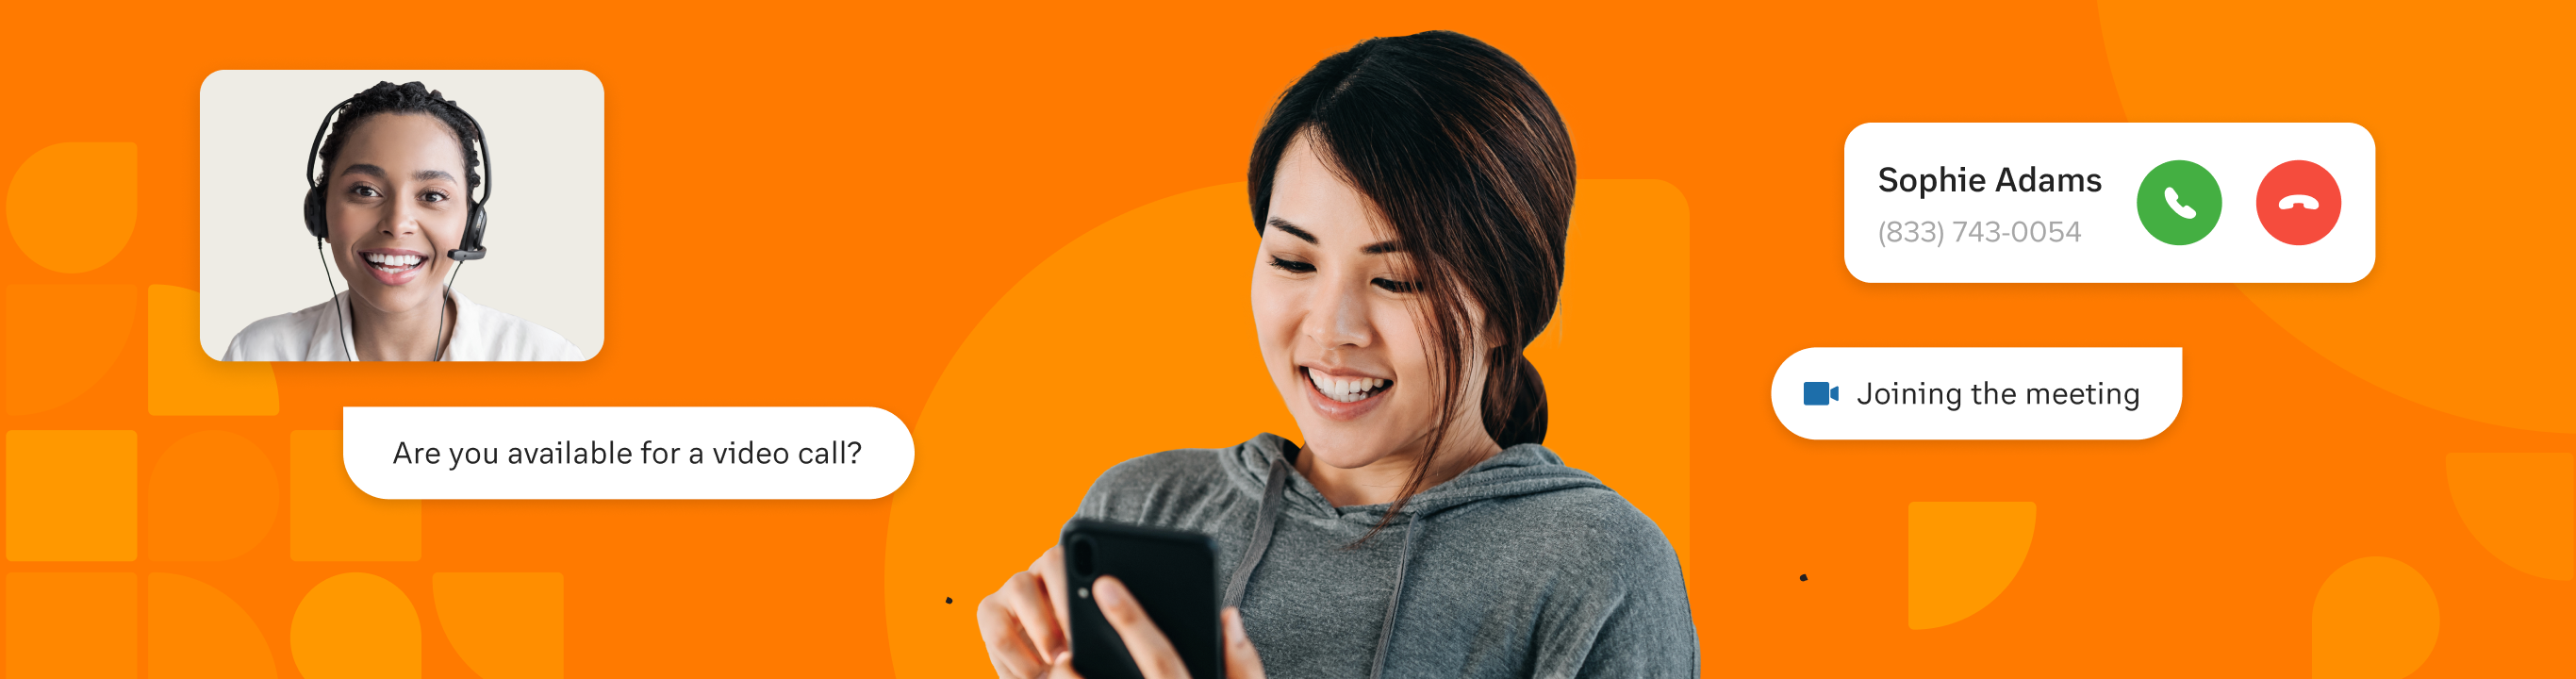 Welcome to RingCentral: Simpler Communications 